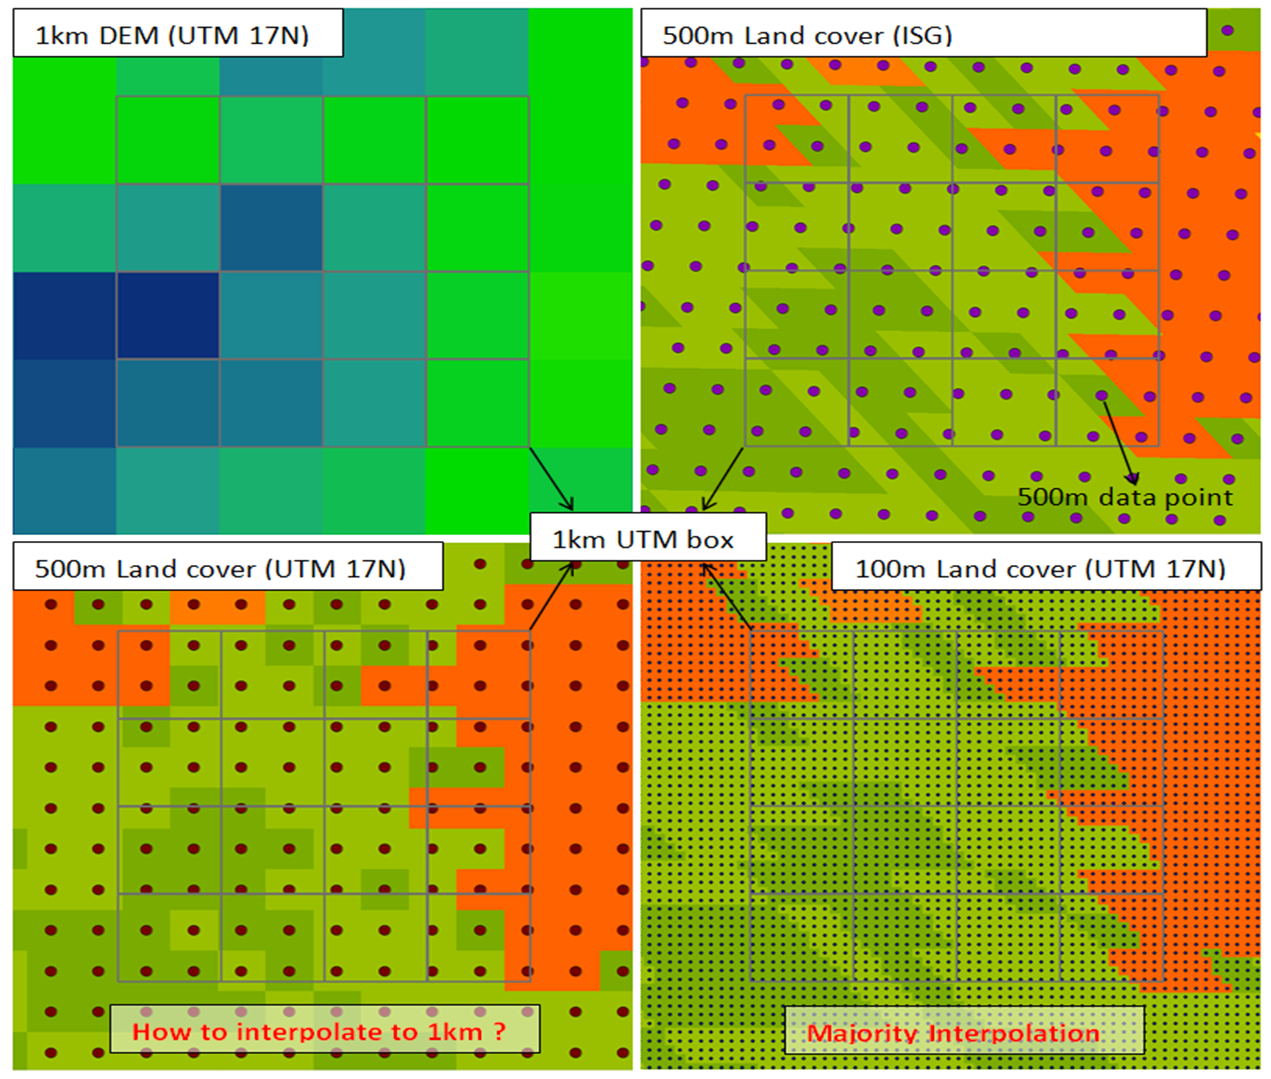 MODIS 500m land cover products to 1000m